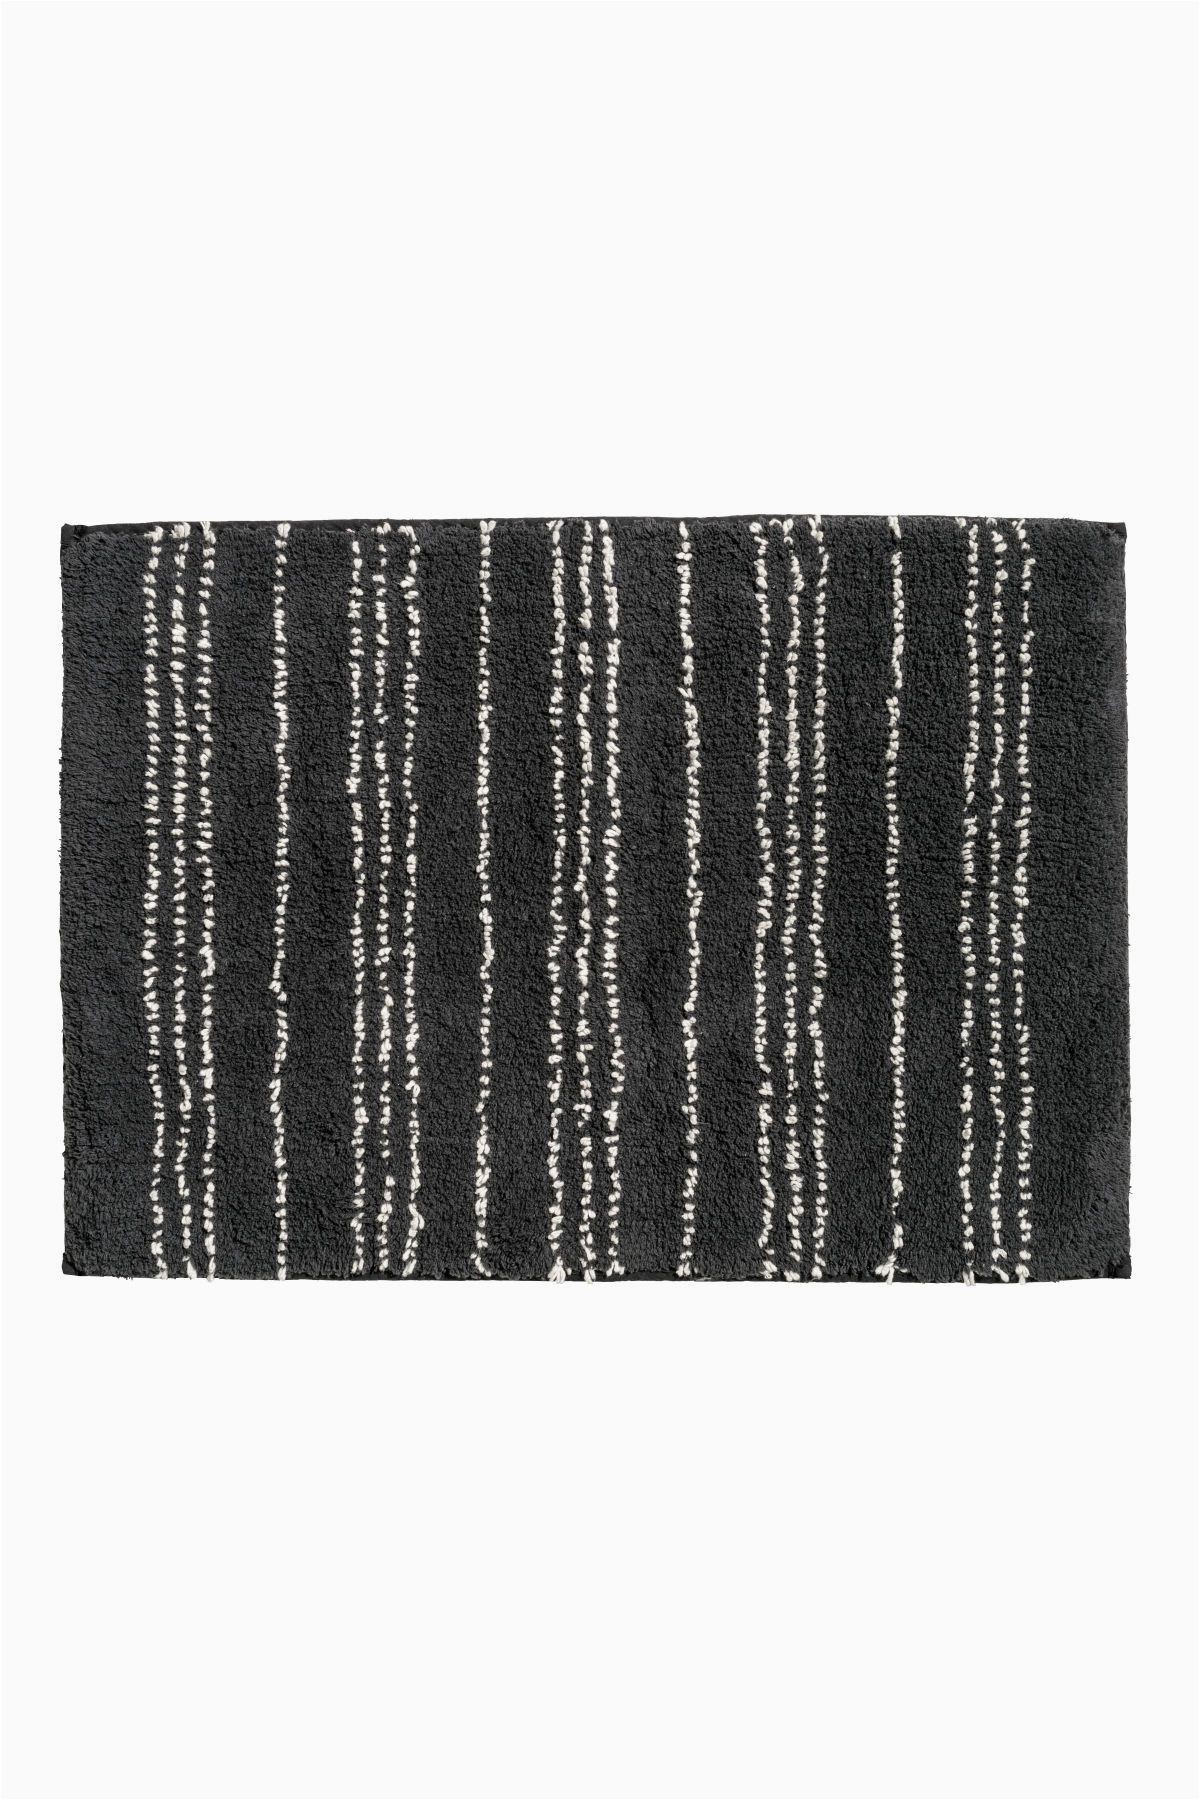 Charcoal Gray Bathroom Rugs Charcoal Gray White Patterned Rectangular Bath Mat In